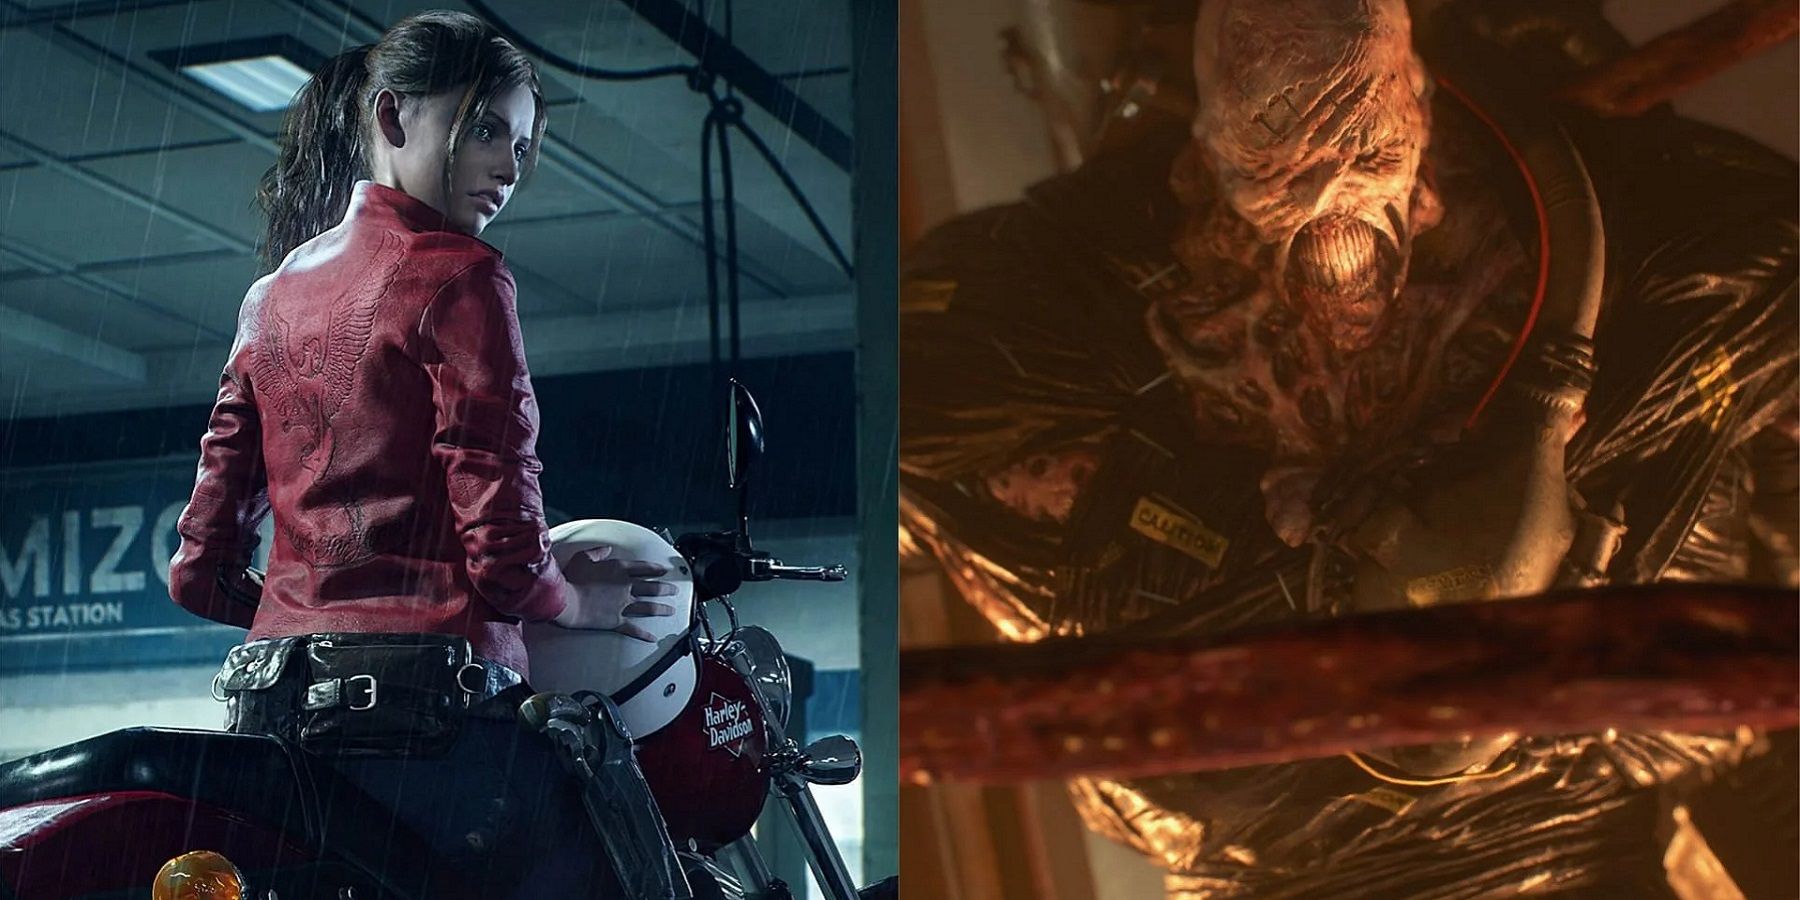 Spliced image showing Claire Redfield from Resident Evil 2 on the left and Nemesis from Resident Evil 3 on the right.